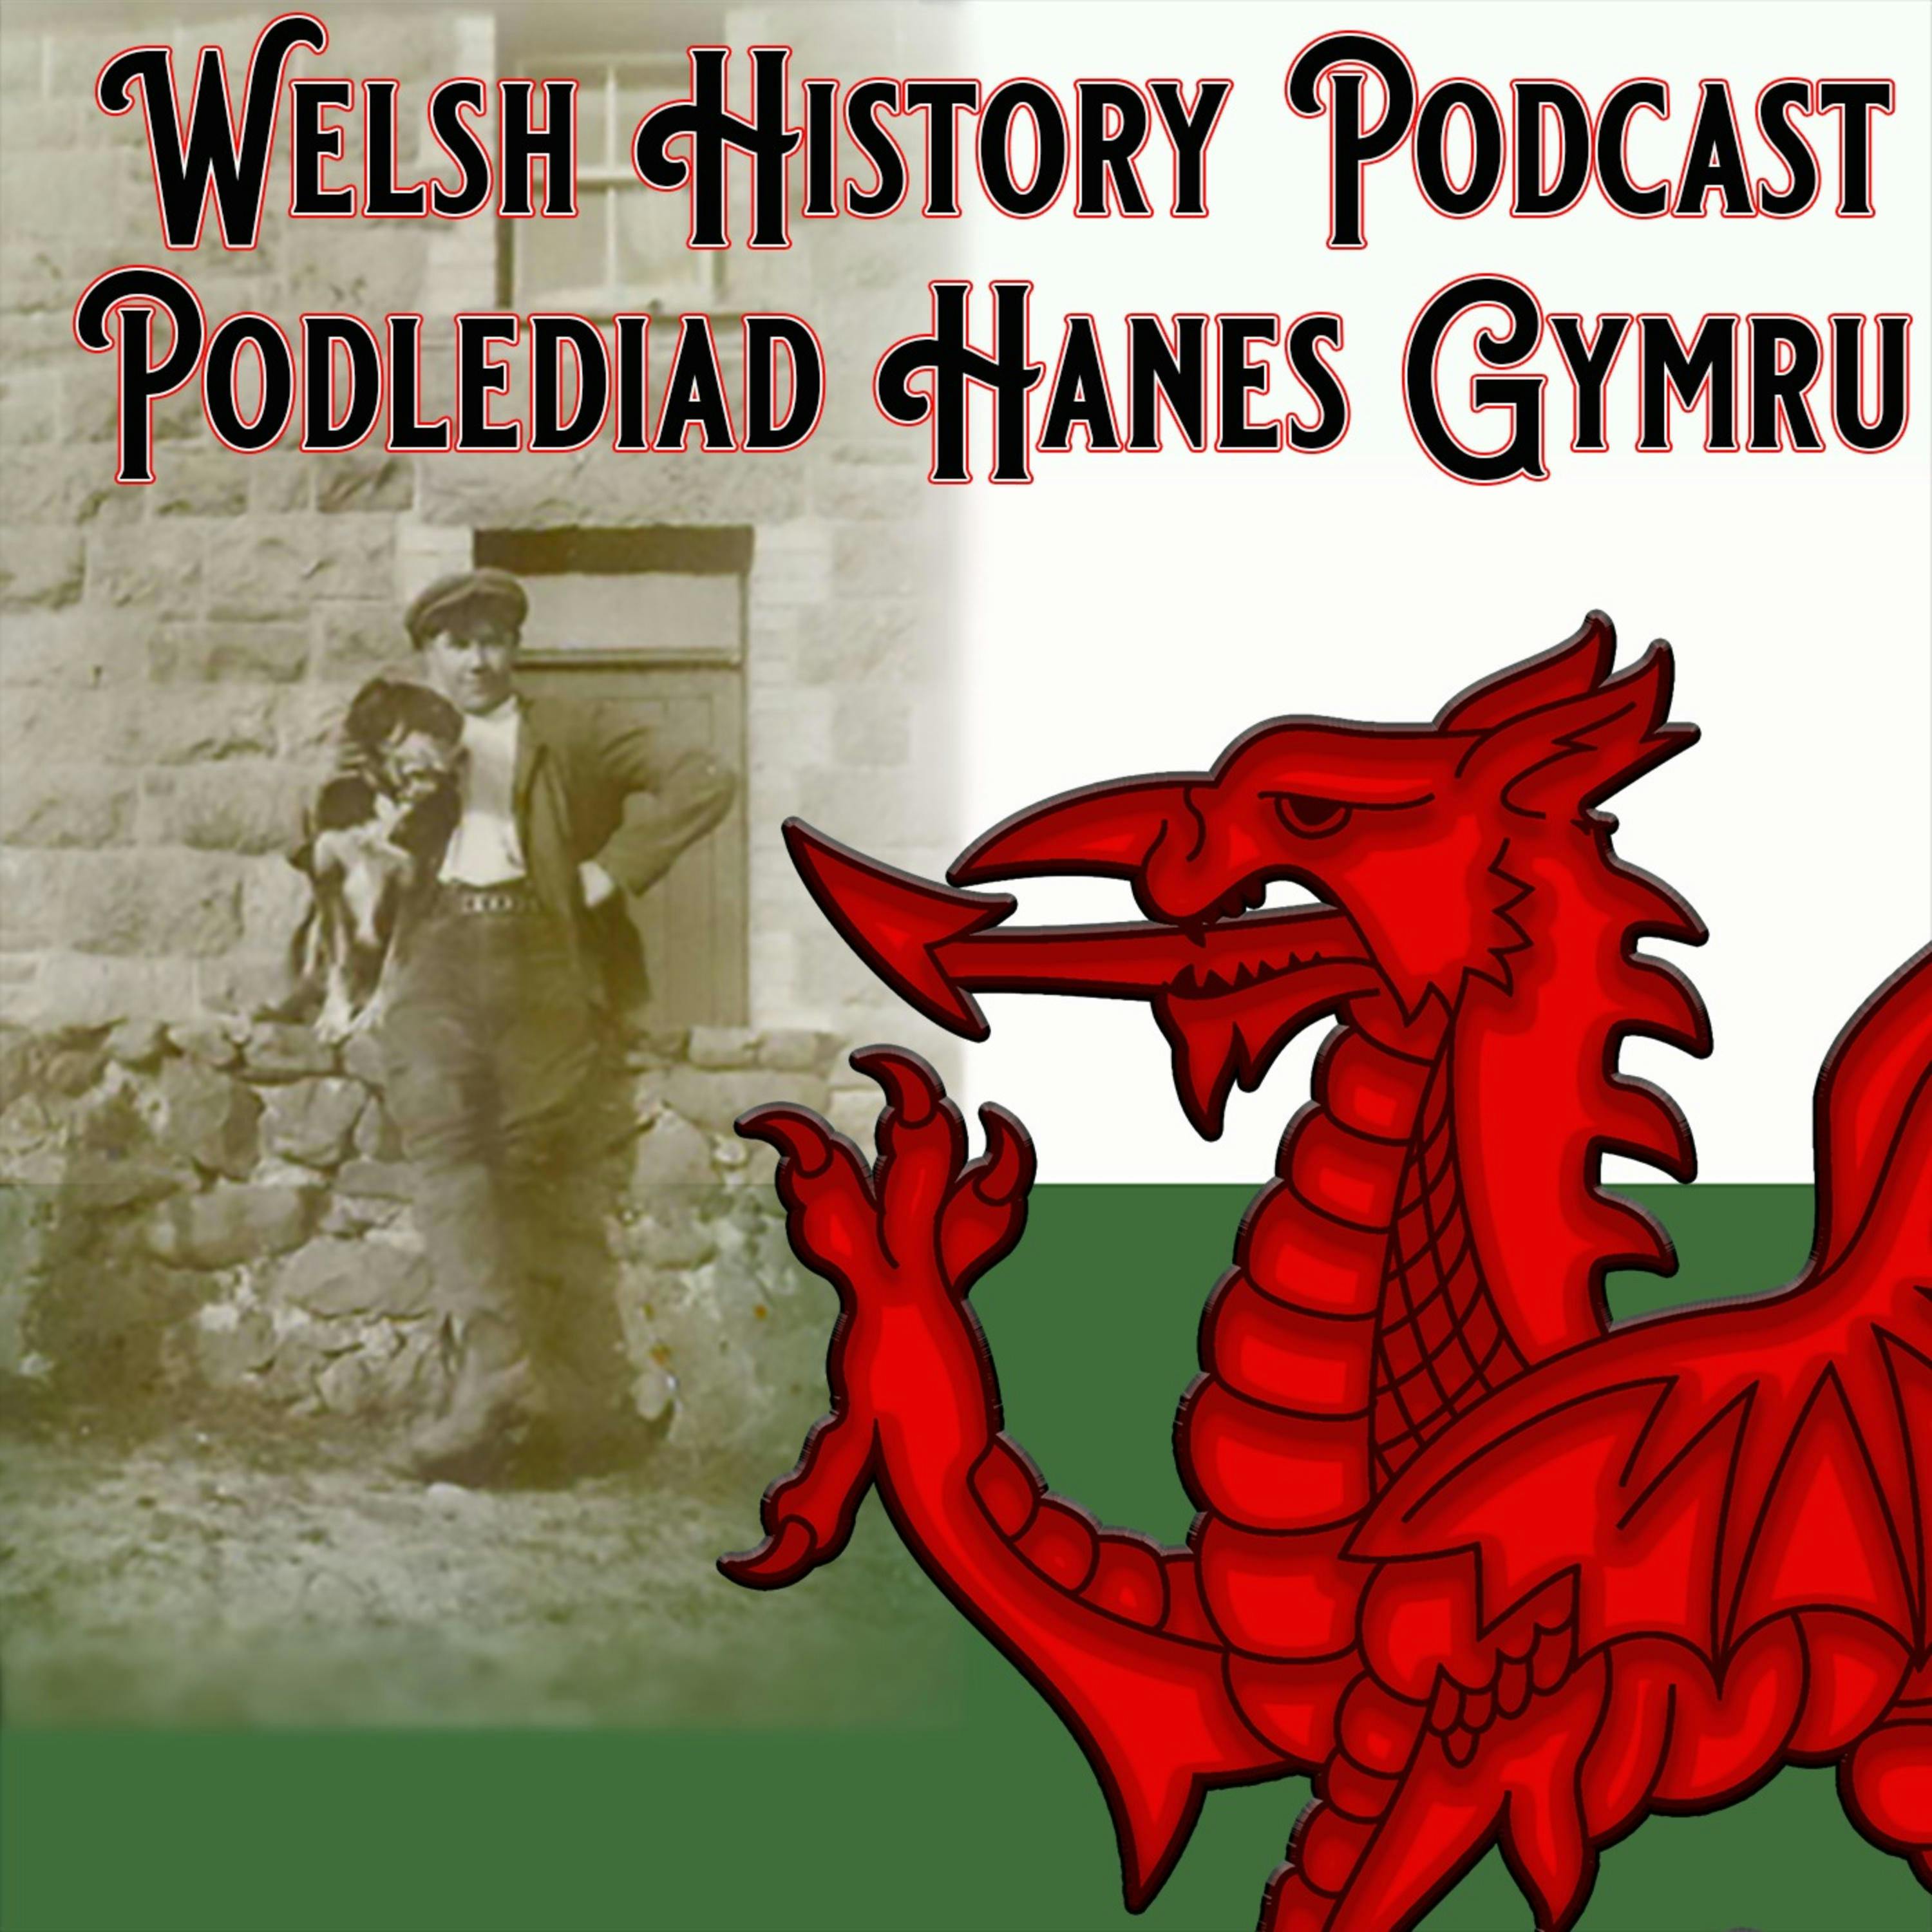 Guest Episode: The Rise of Llywelyn the Great (Welsh History Podcast)